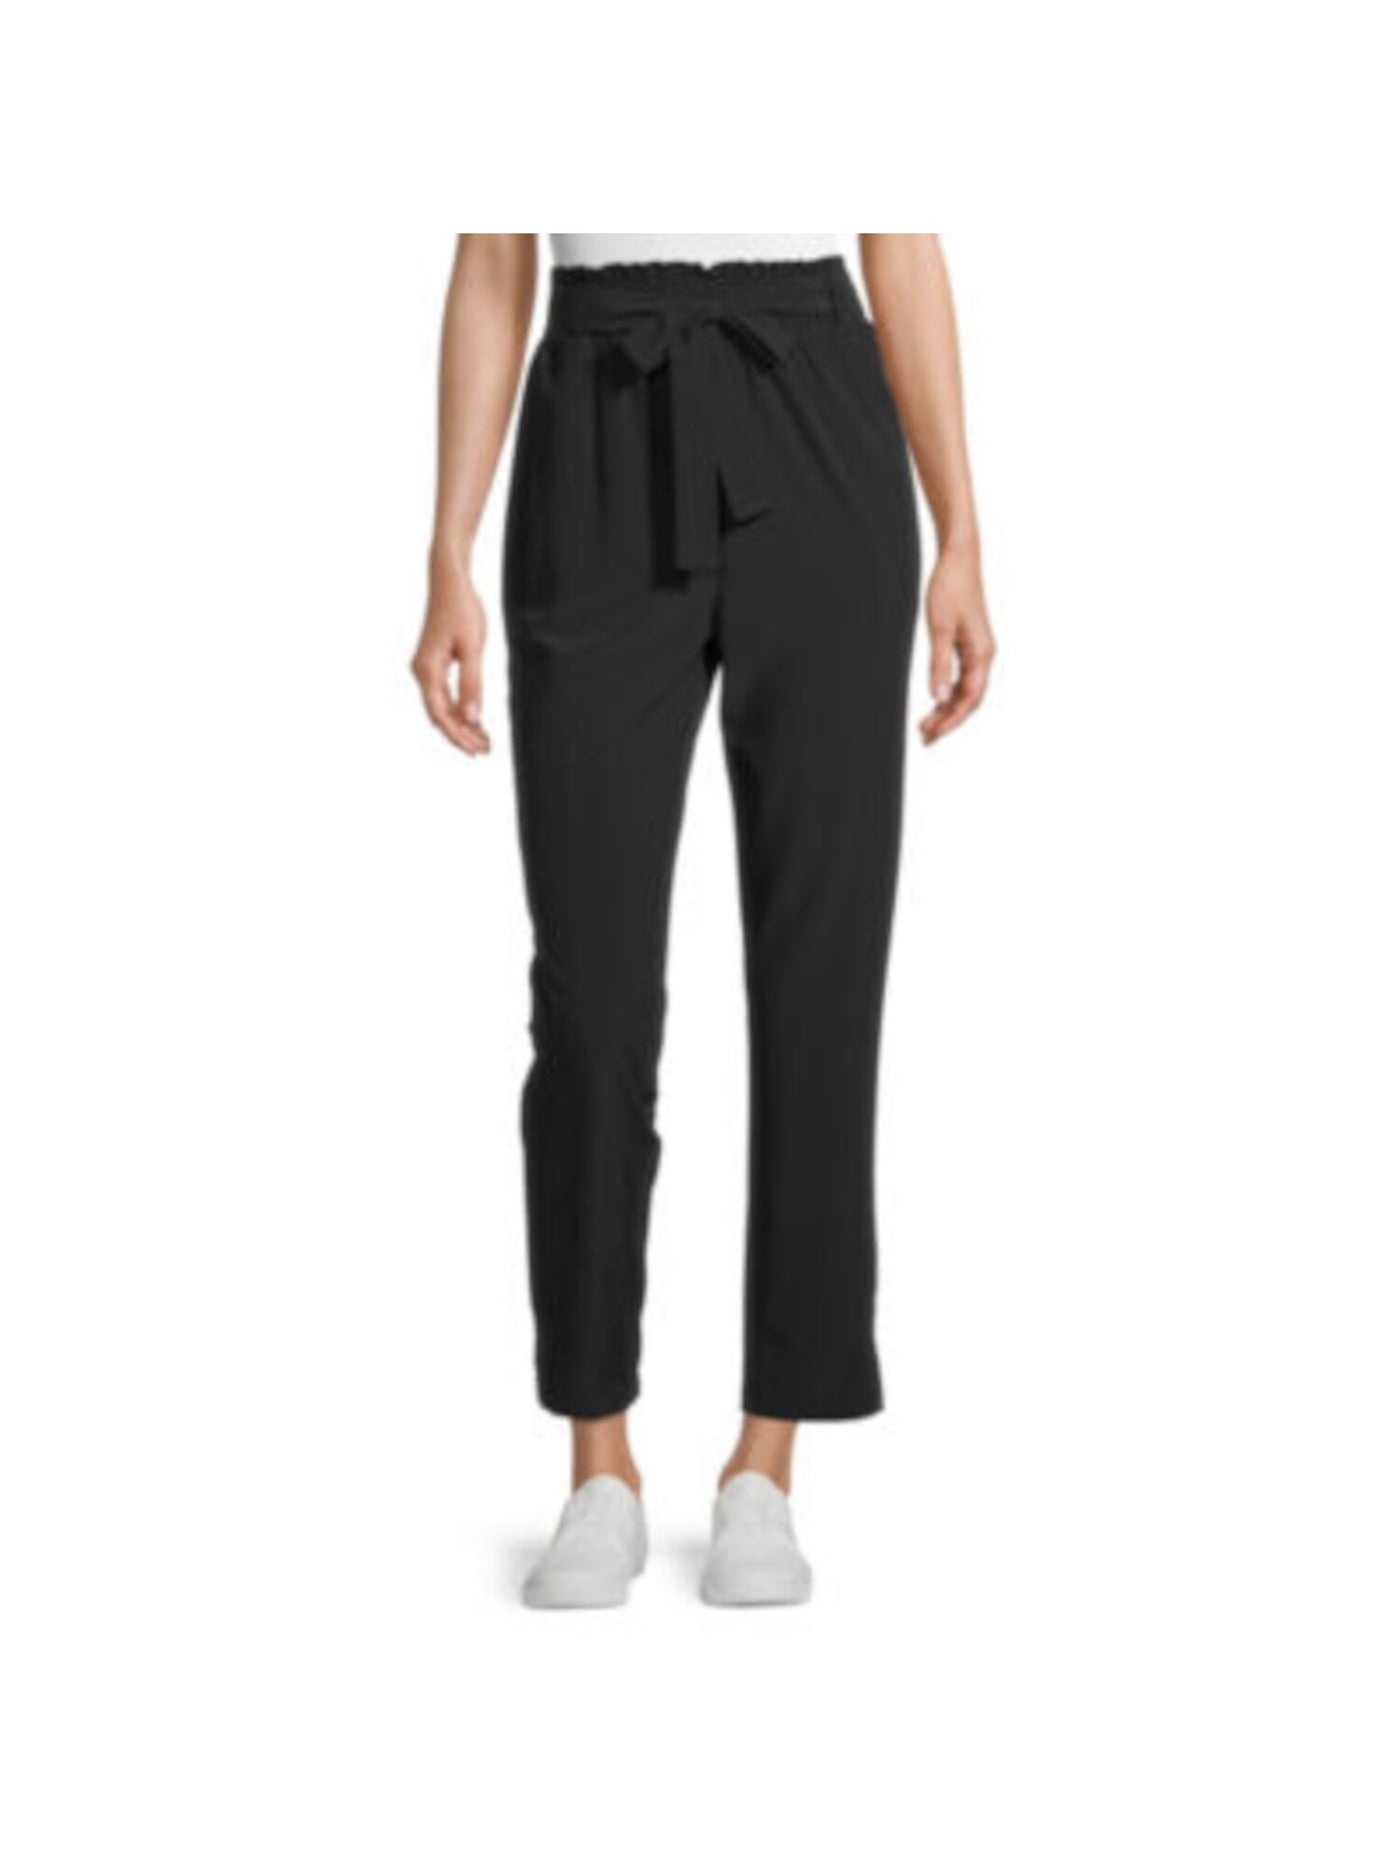 COUNTERPARTS Womens Black Belted Gathered High Waist Pants Petites PXL